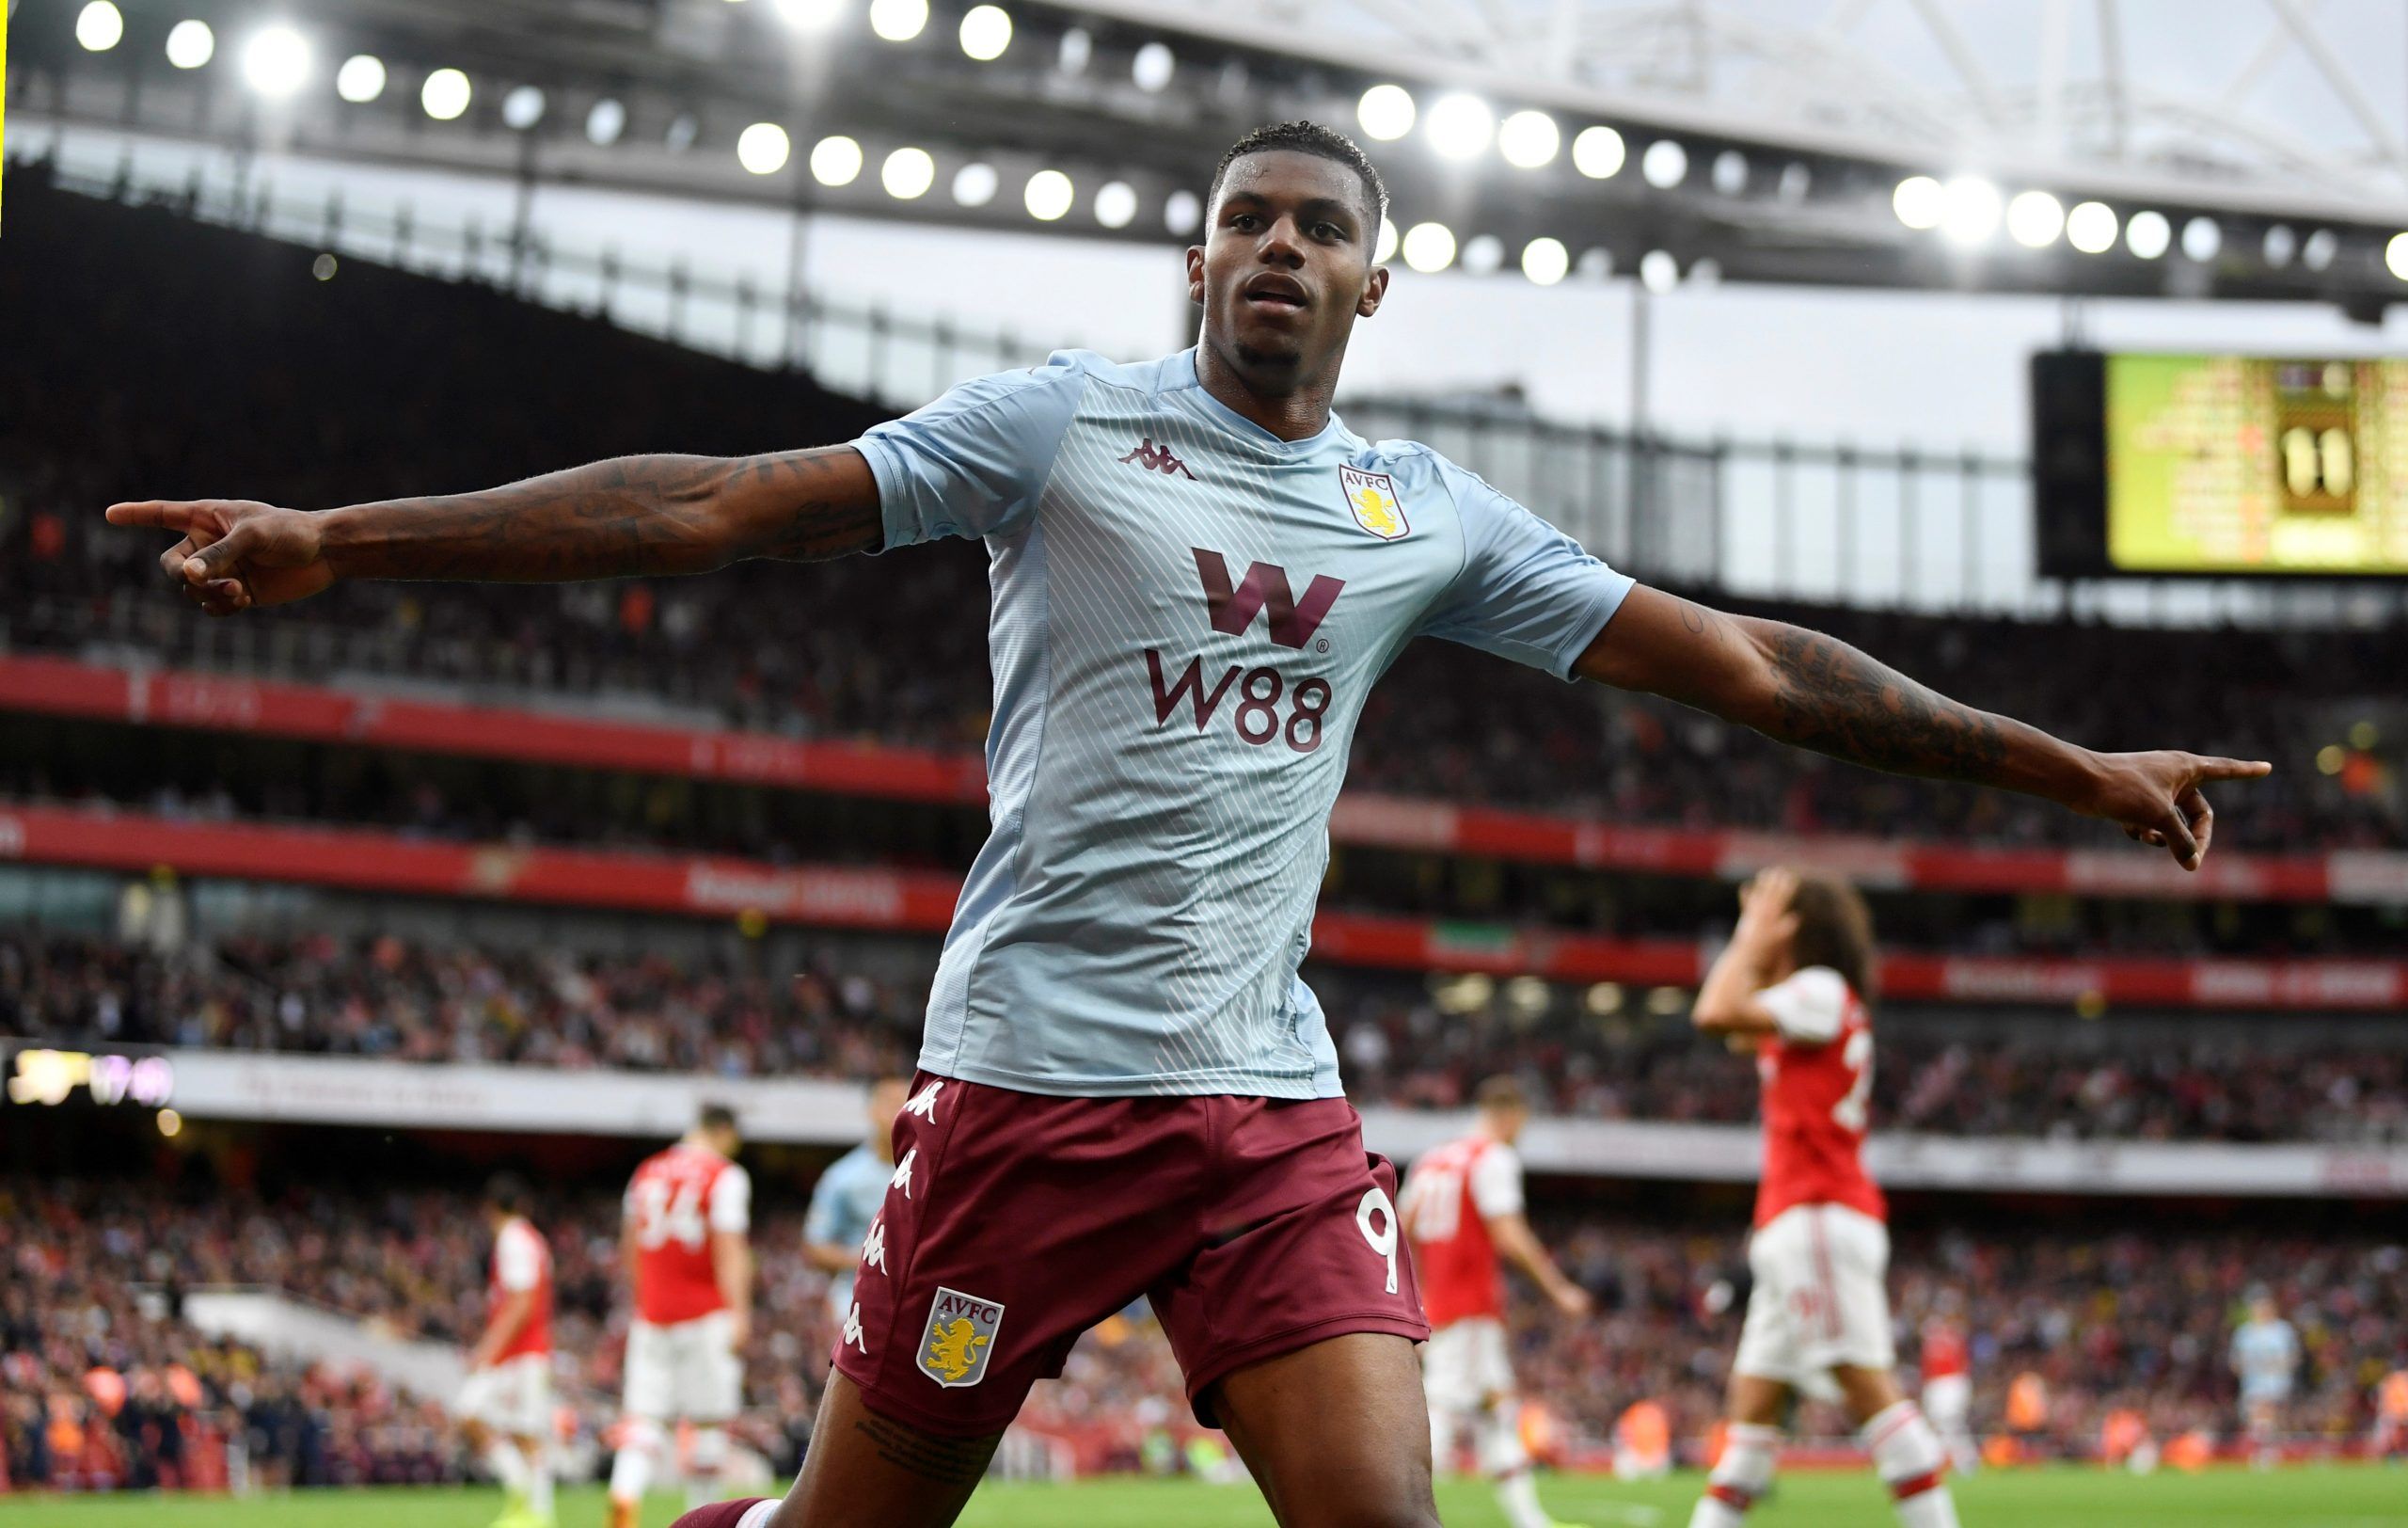 Soccer Football - Premier League - Arsenal v Aston Villa - Emirates Stadium, London, Britain - September 22, 2019  Aston Villa's Wesley celebrates scoring their second goal  Action Images via Reuters/Tony O'Brien  EDITORIAL USE ONLY. No use with unauthorized audio, video, data, fixture lists, club/league logos or 